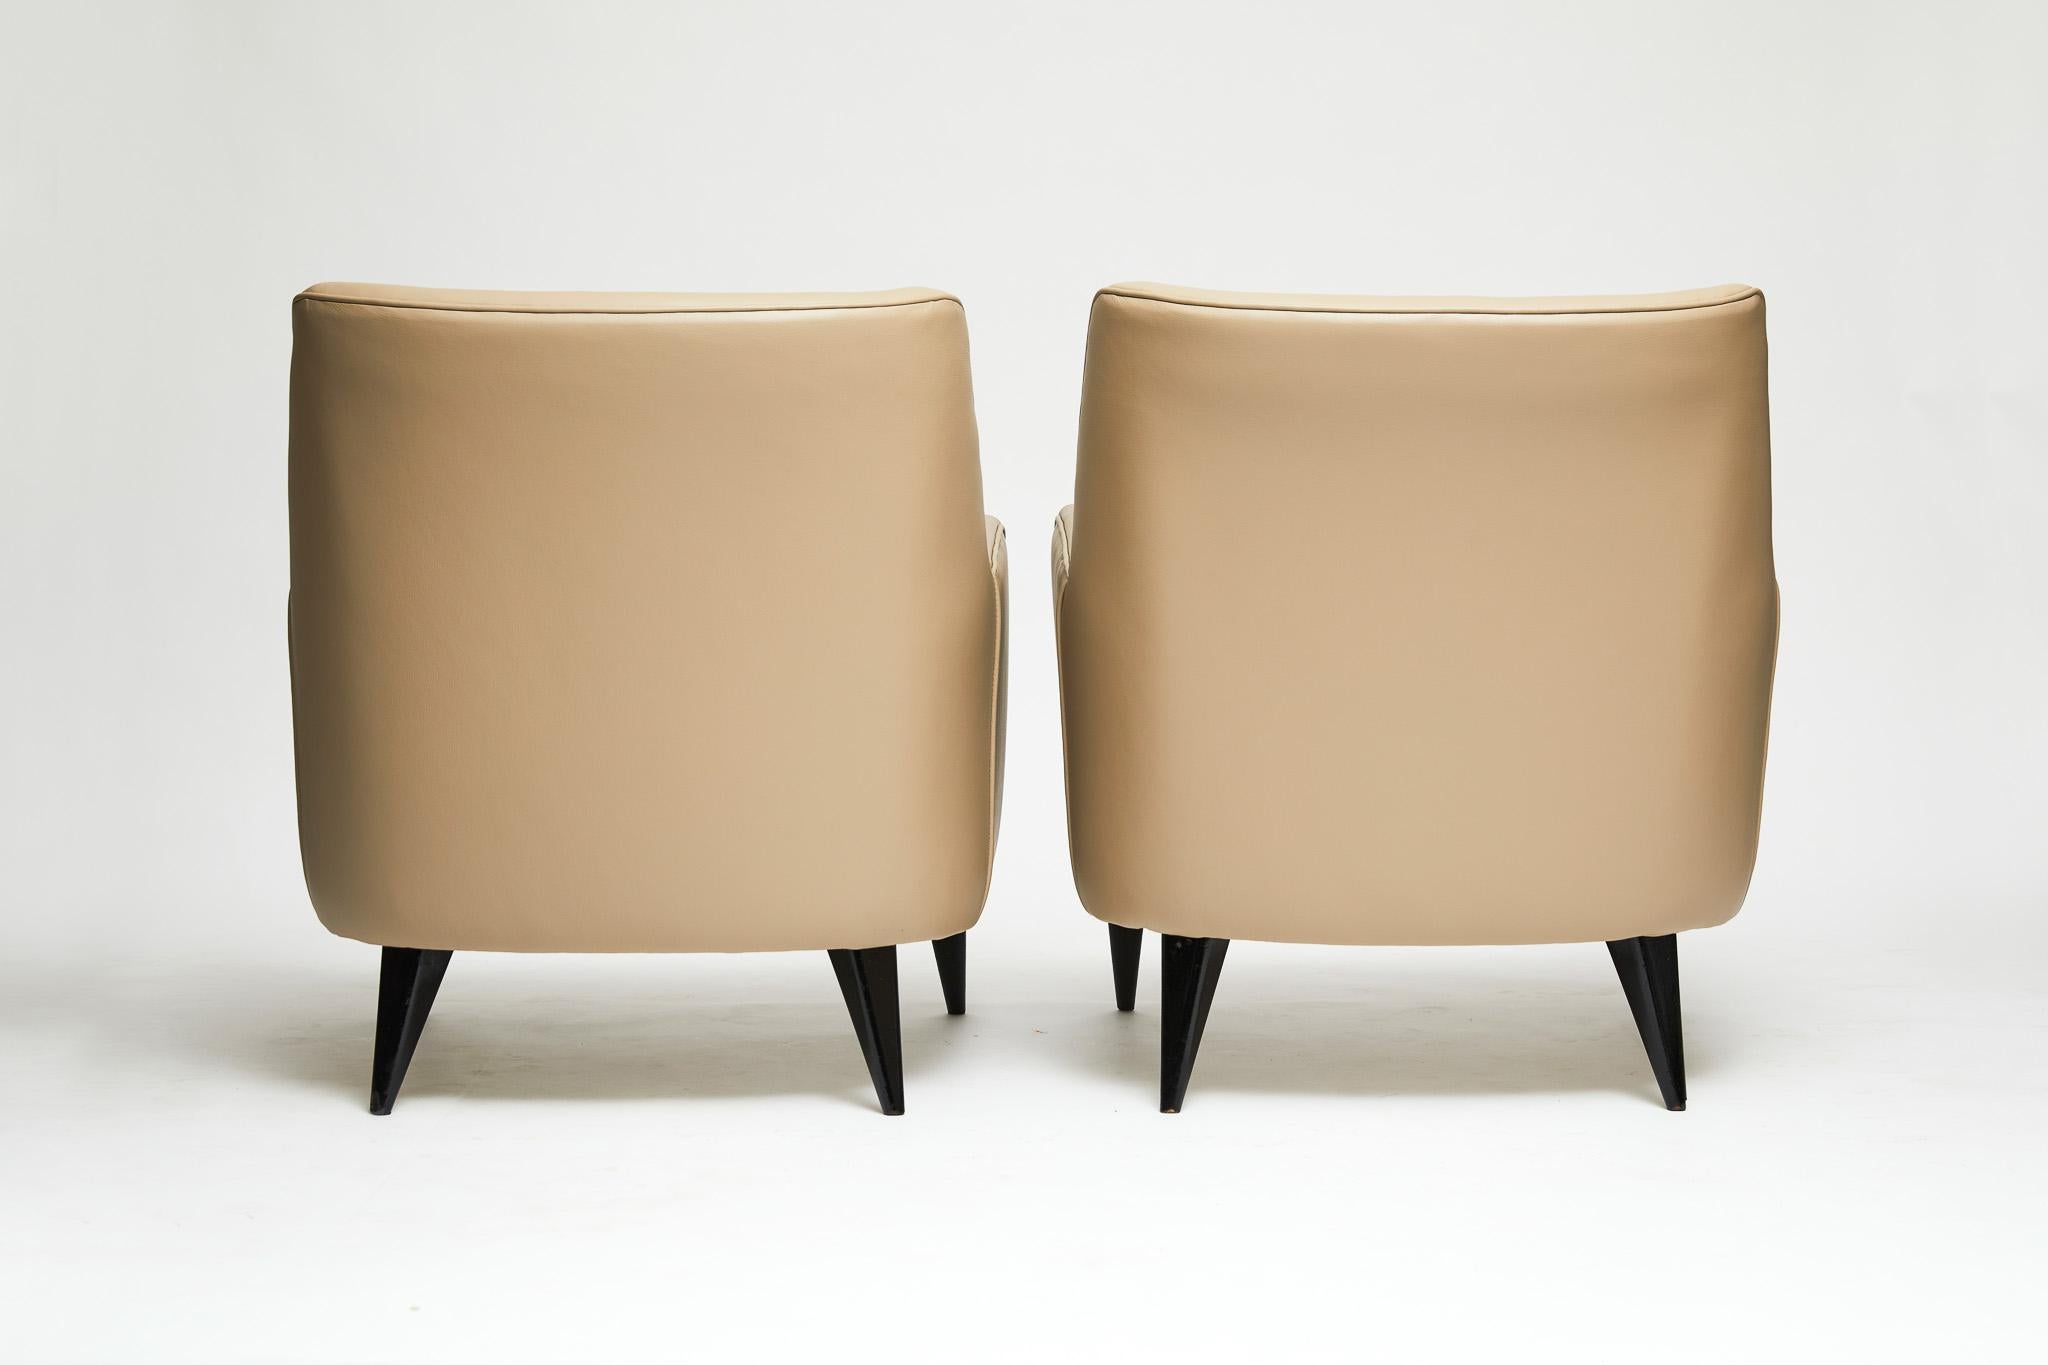 Mid-Century Modern Armchairs in Leather & Wood by Joaquim Tenreiro, 1955, Brazil For Sale 1